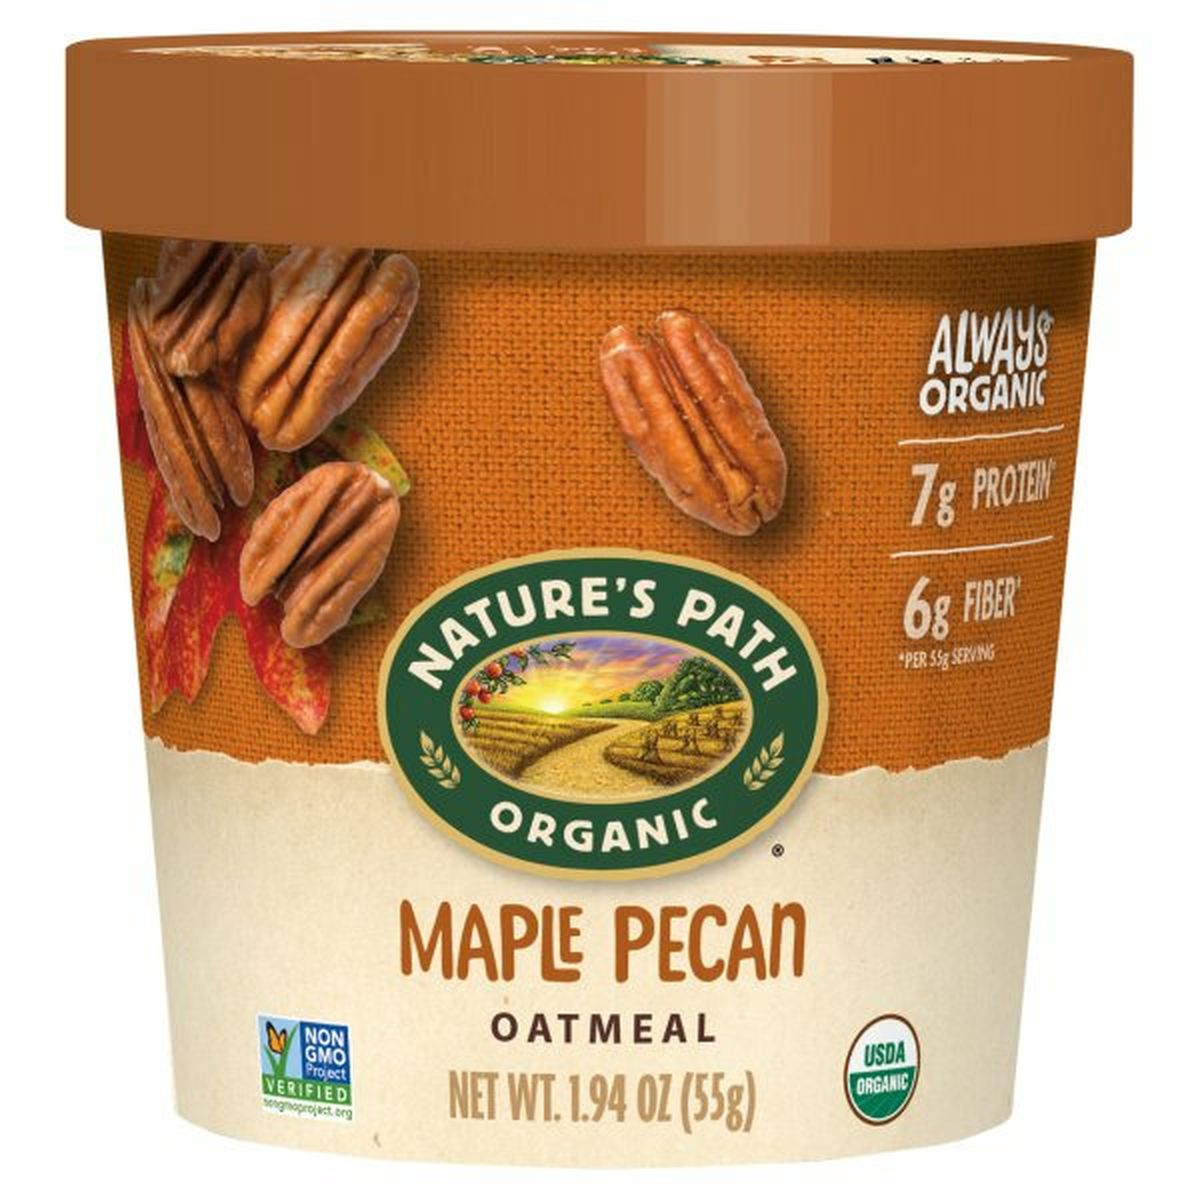 Calories in Nature's Path Oatmeal, Maple Pecan